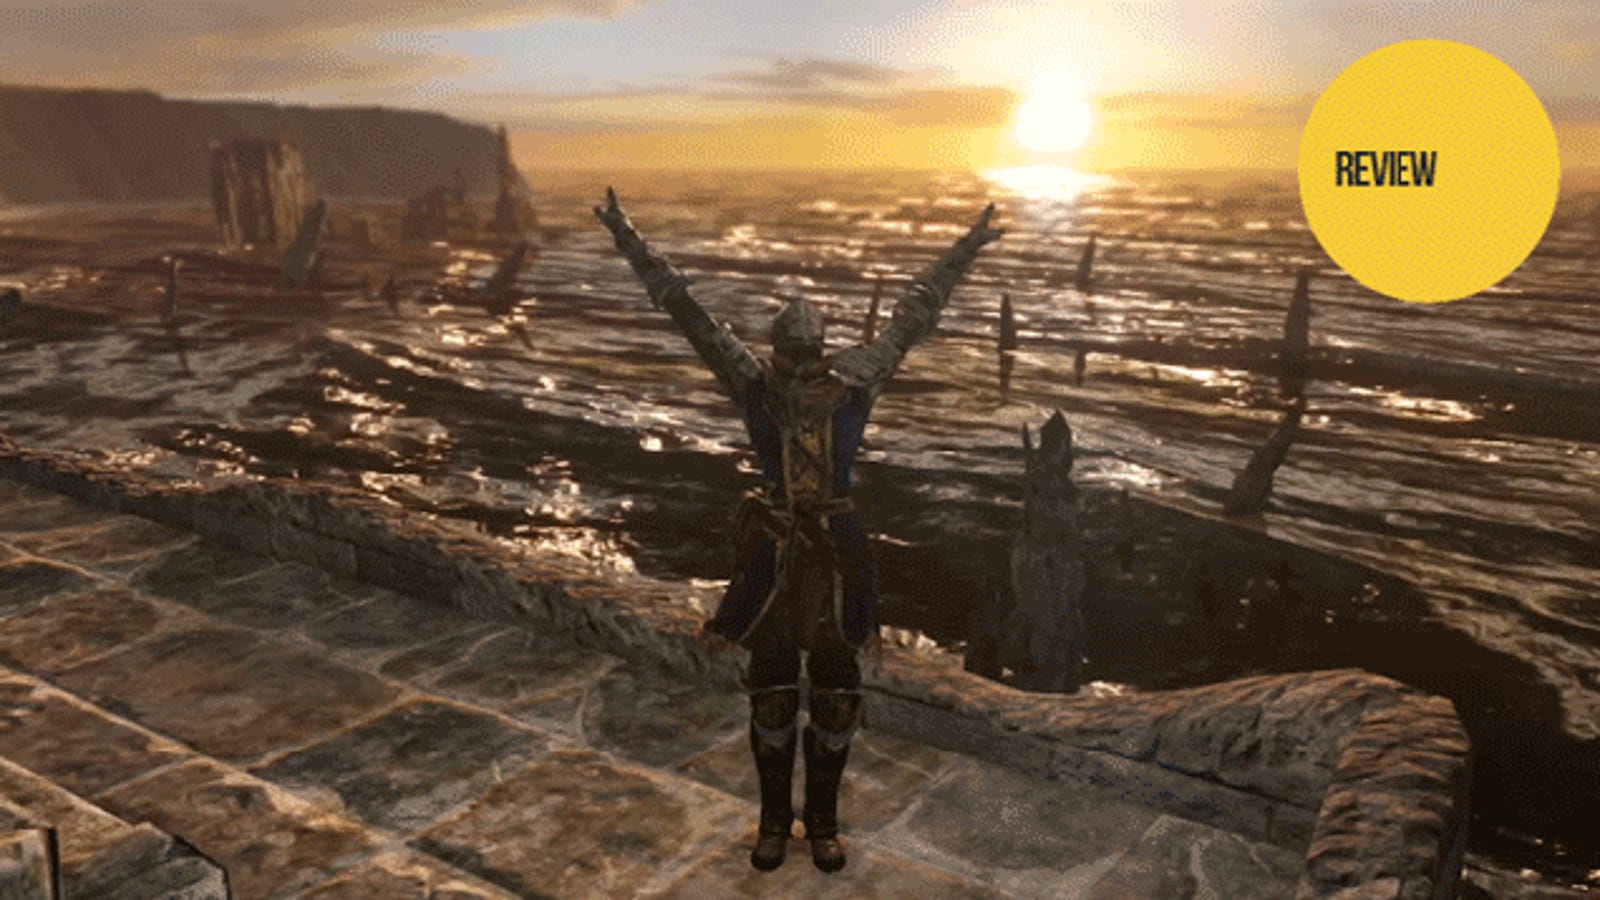 games to fill the gap for dark souls 3